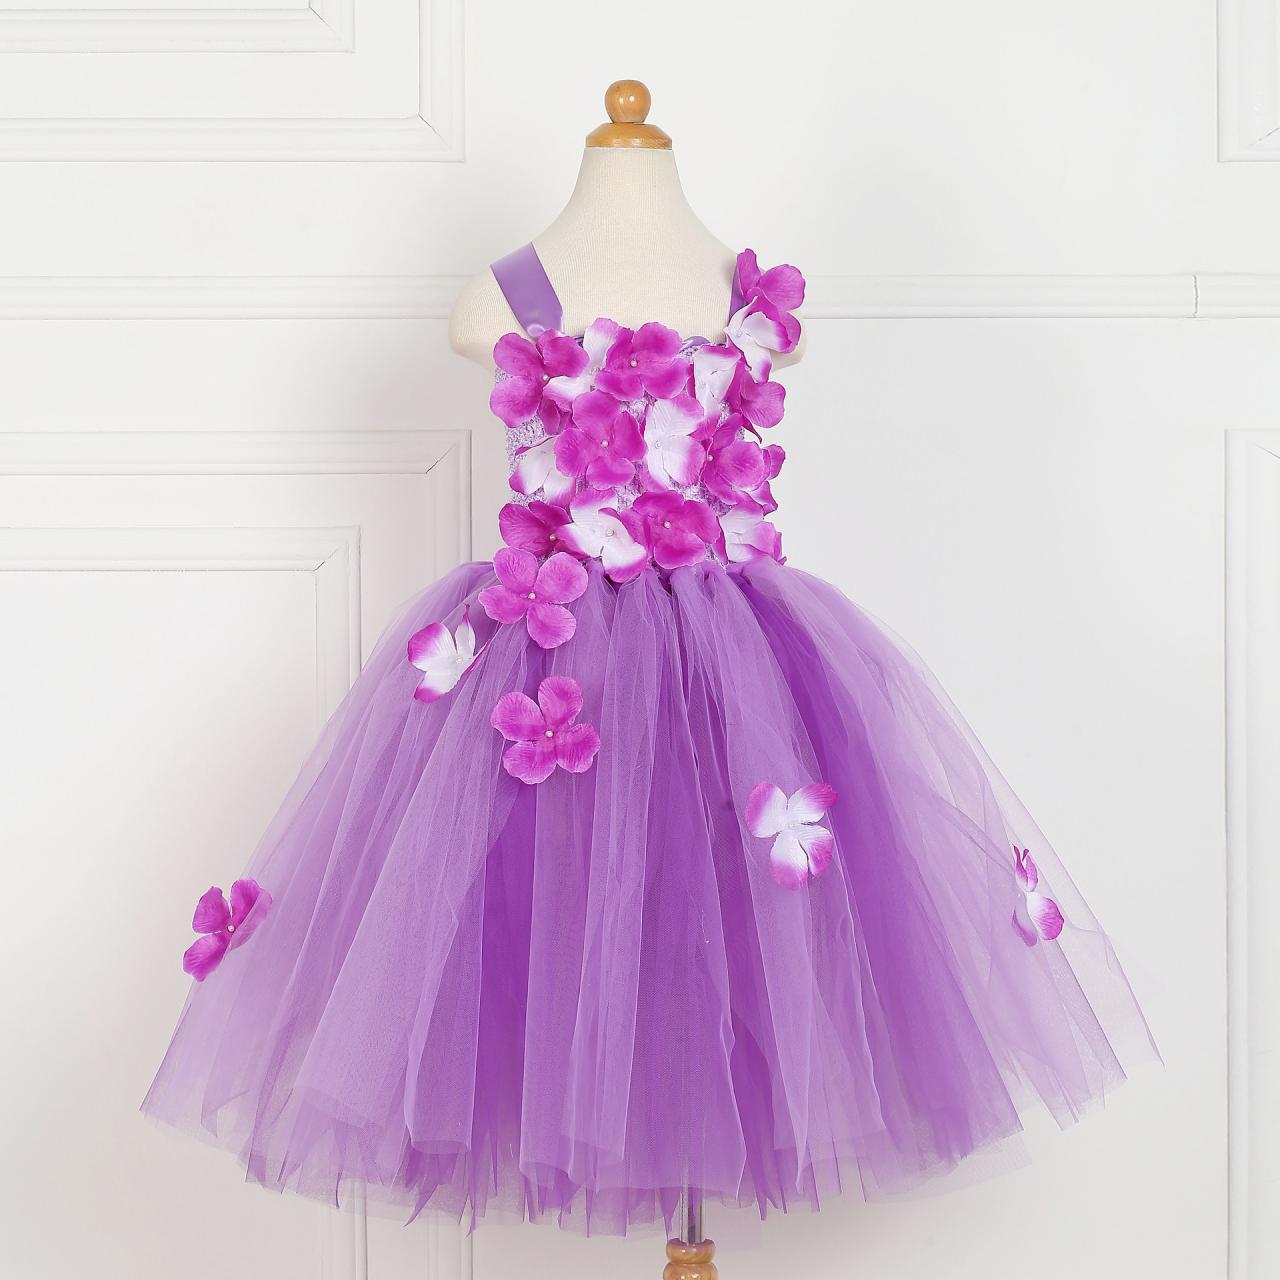 Princess Lavender Girls Costume Dress With Hand Made Flowers Ball Gown Children Outfits For Birthday Party